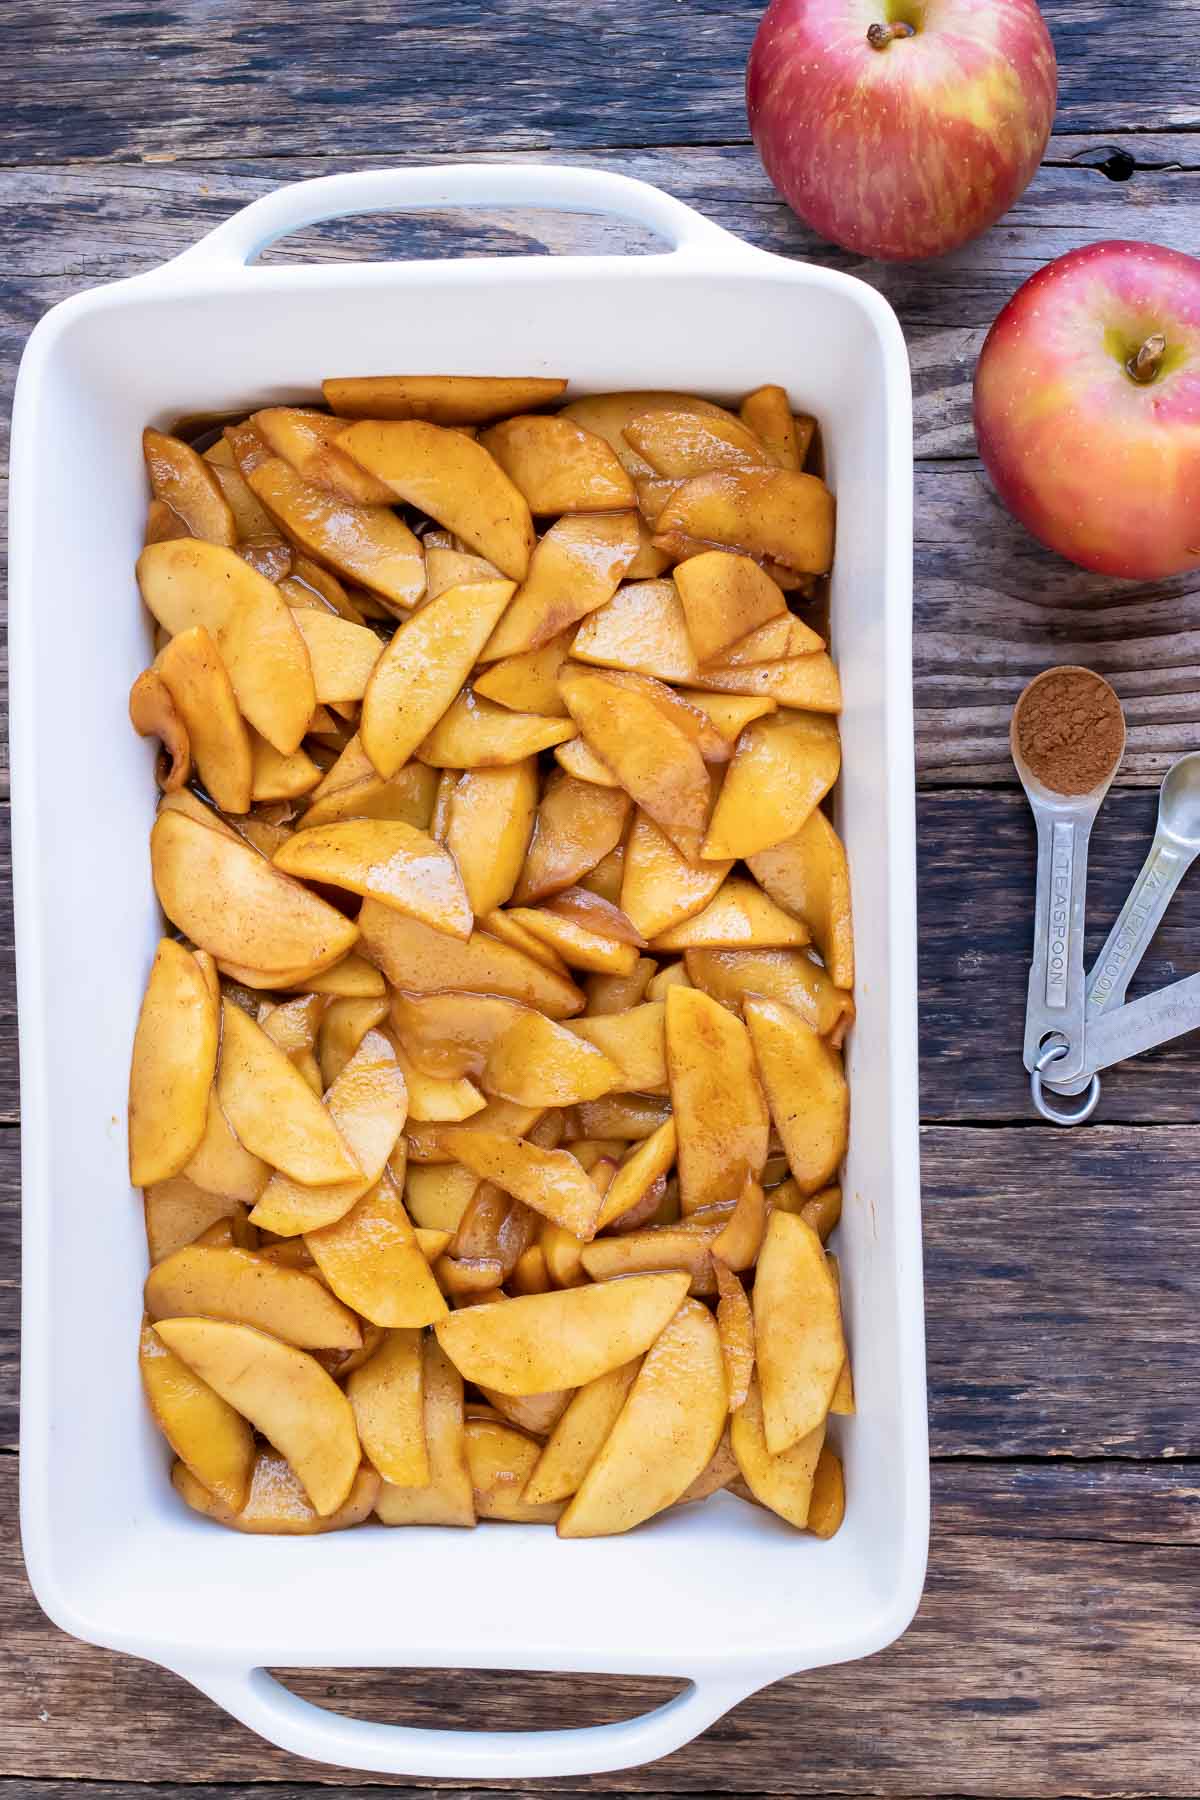 Apples are added to the baking dish.